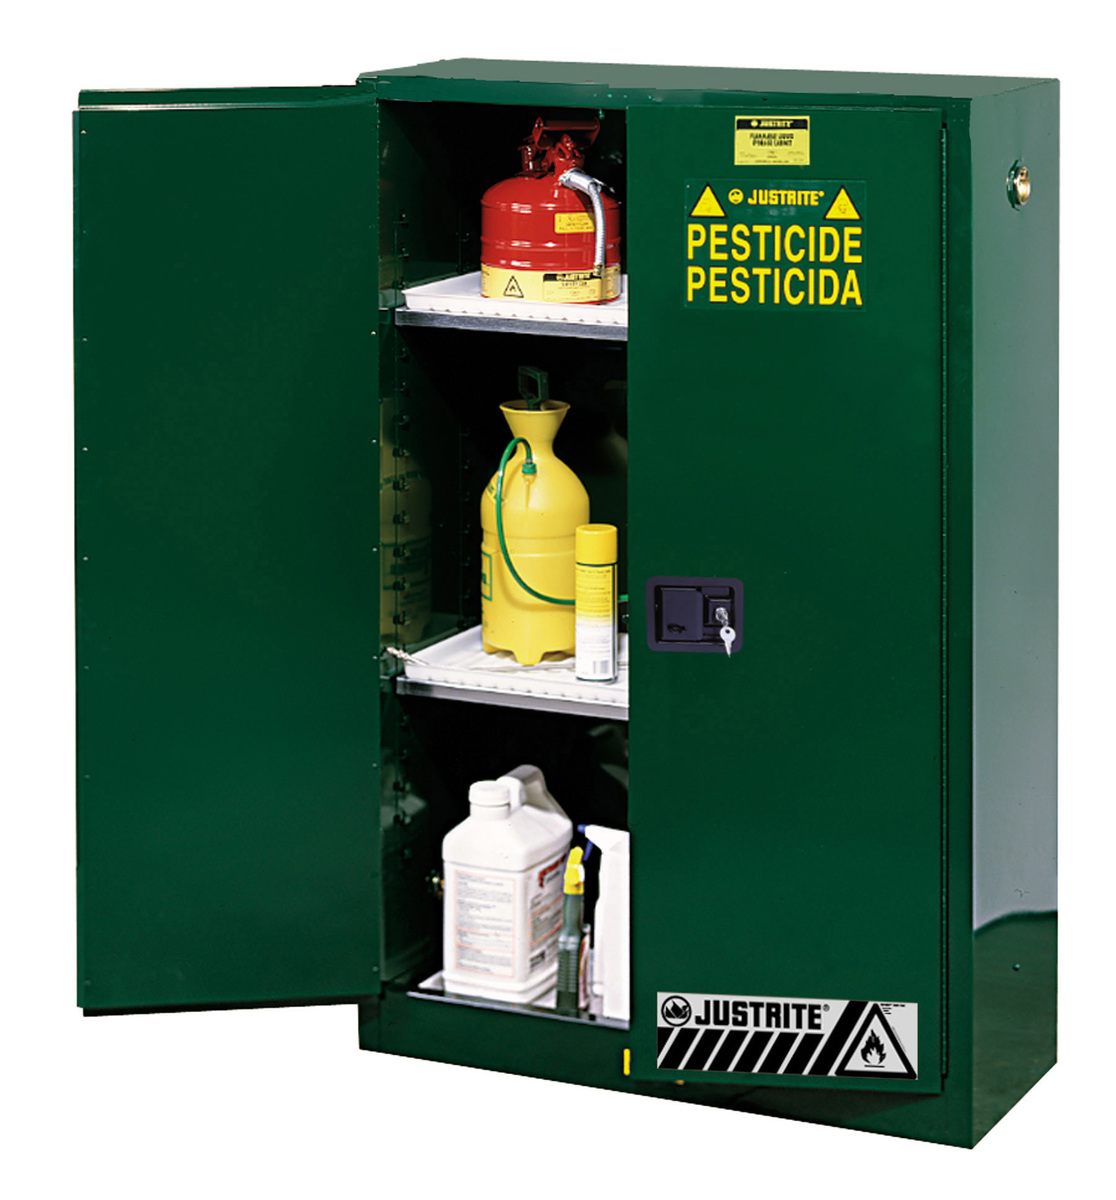 Justrite™ 45 Gallon Green Sure-Grip® EX 18 Gauge Cold Rolled Steel Safety Cabinet With (2) Manual Close Doors And (2) Adjustable